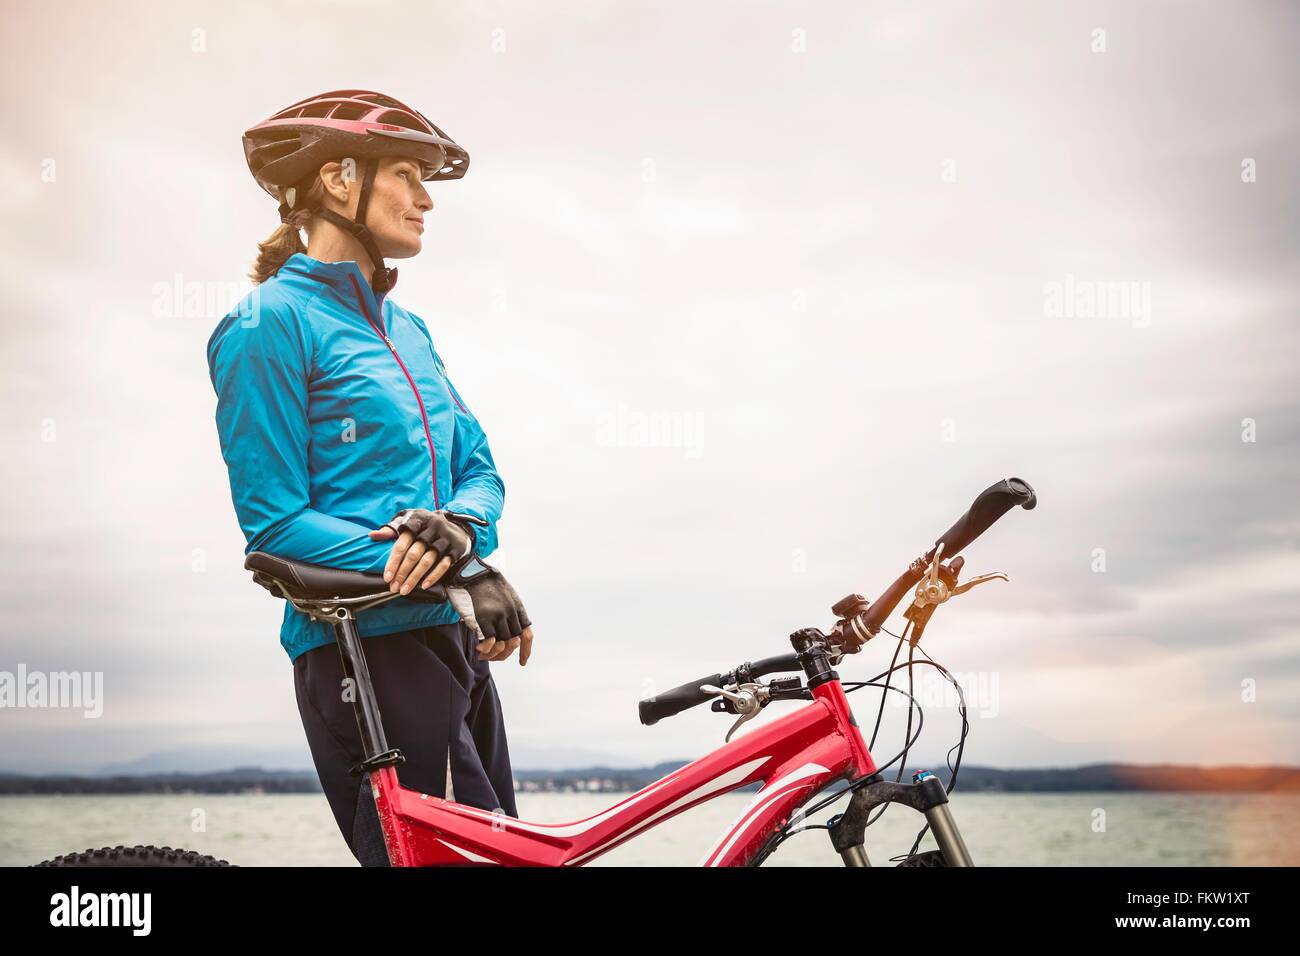 Mature female mountain biker looking out from lakeside Stock Photo